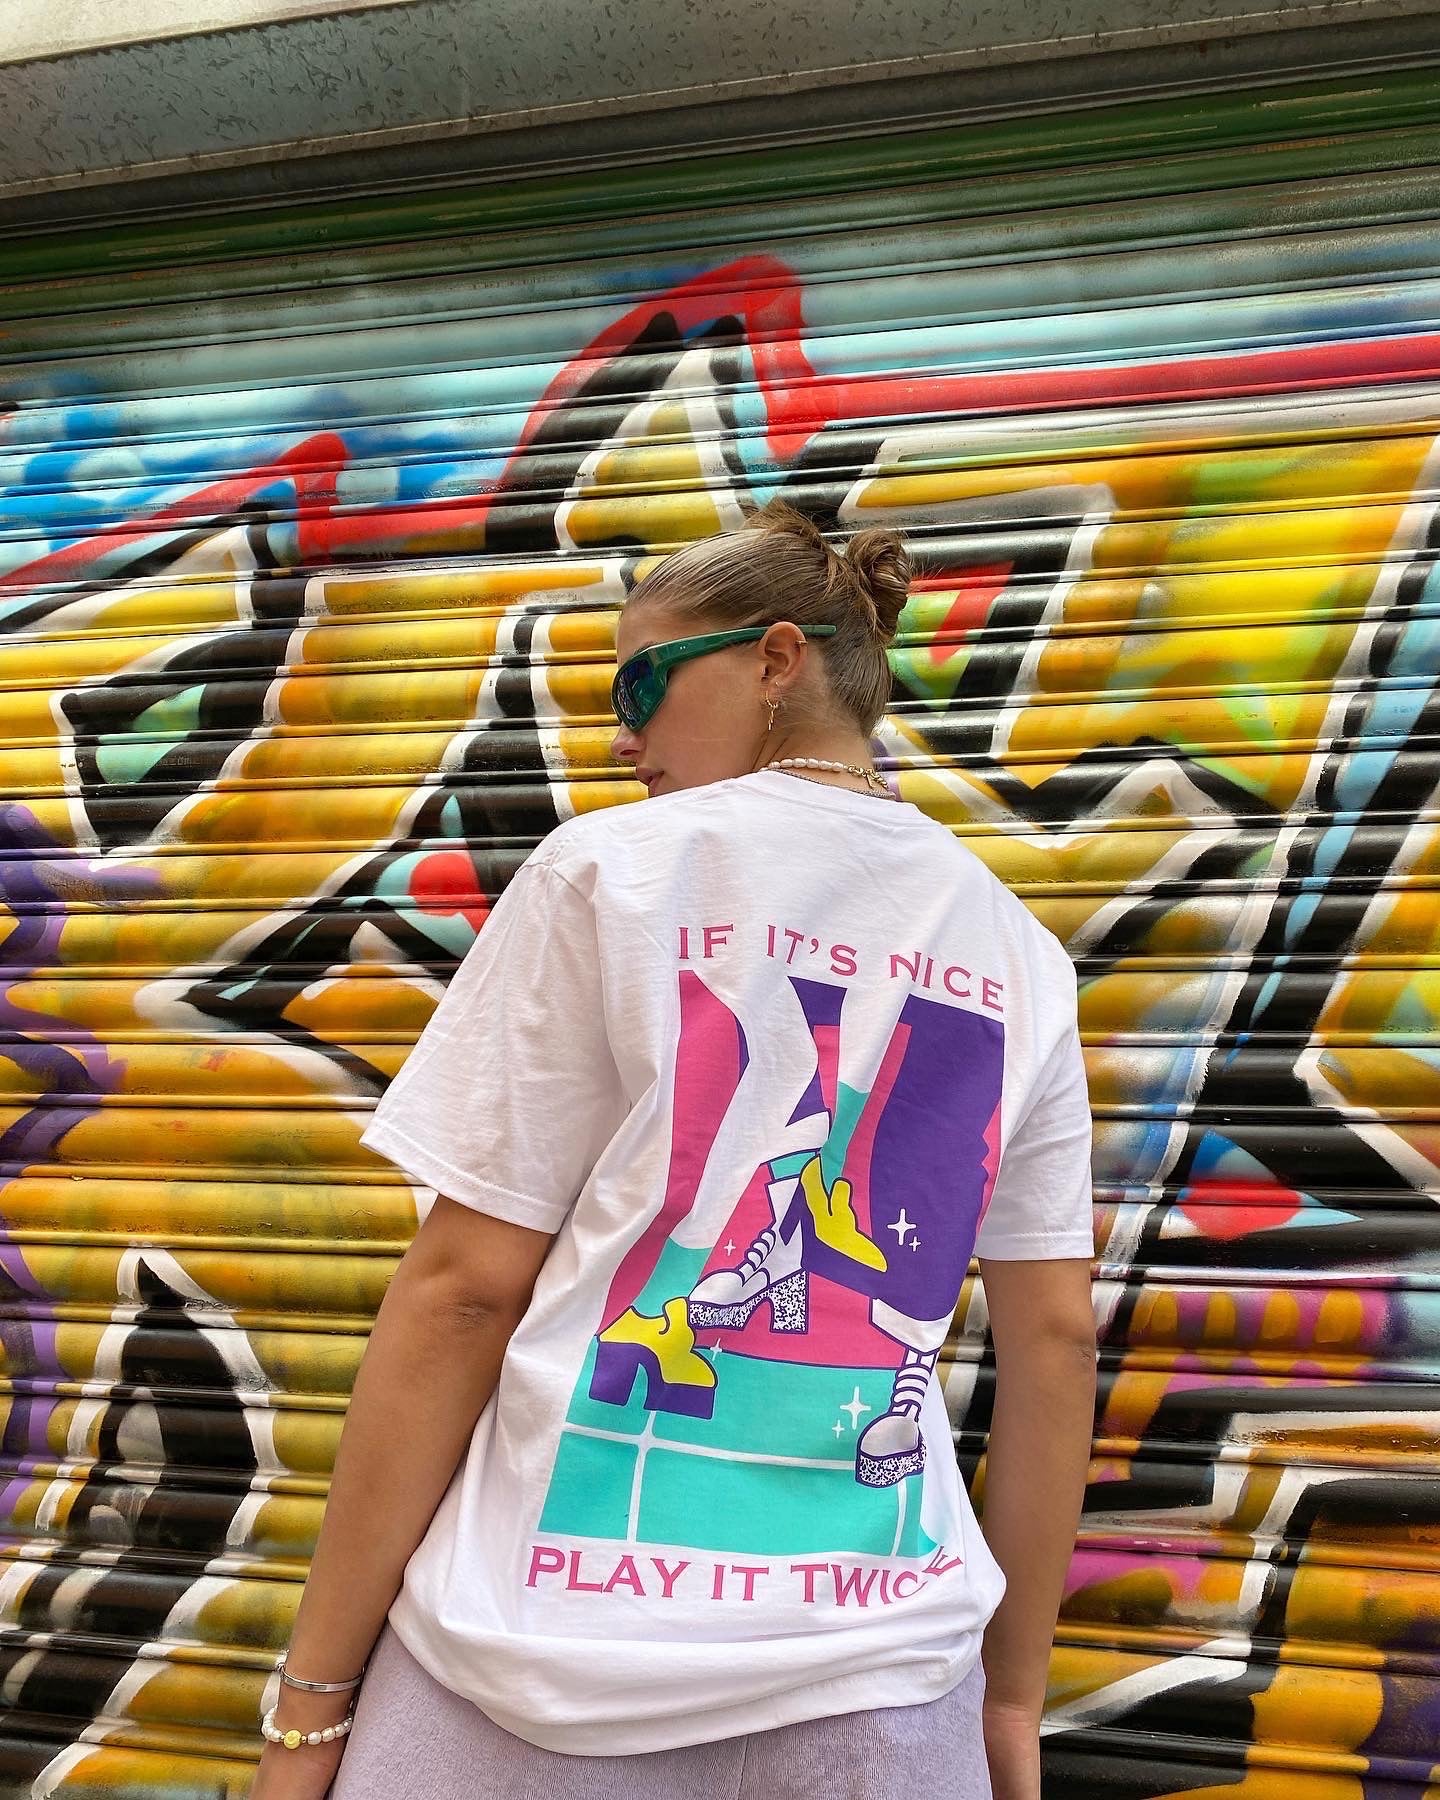 DISCO ONLY 'Play It Twice V3' Tee